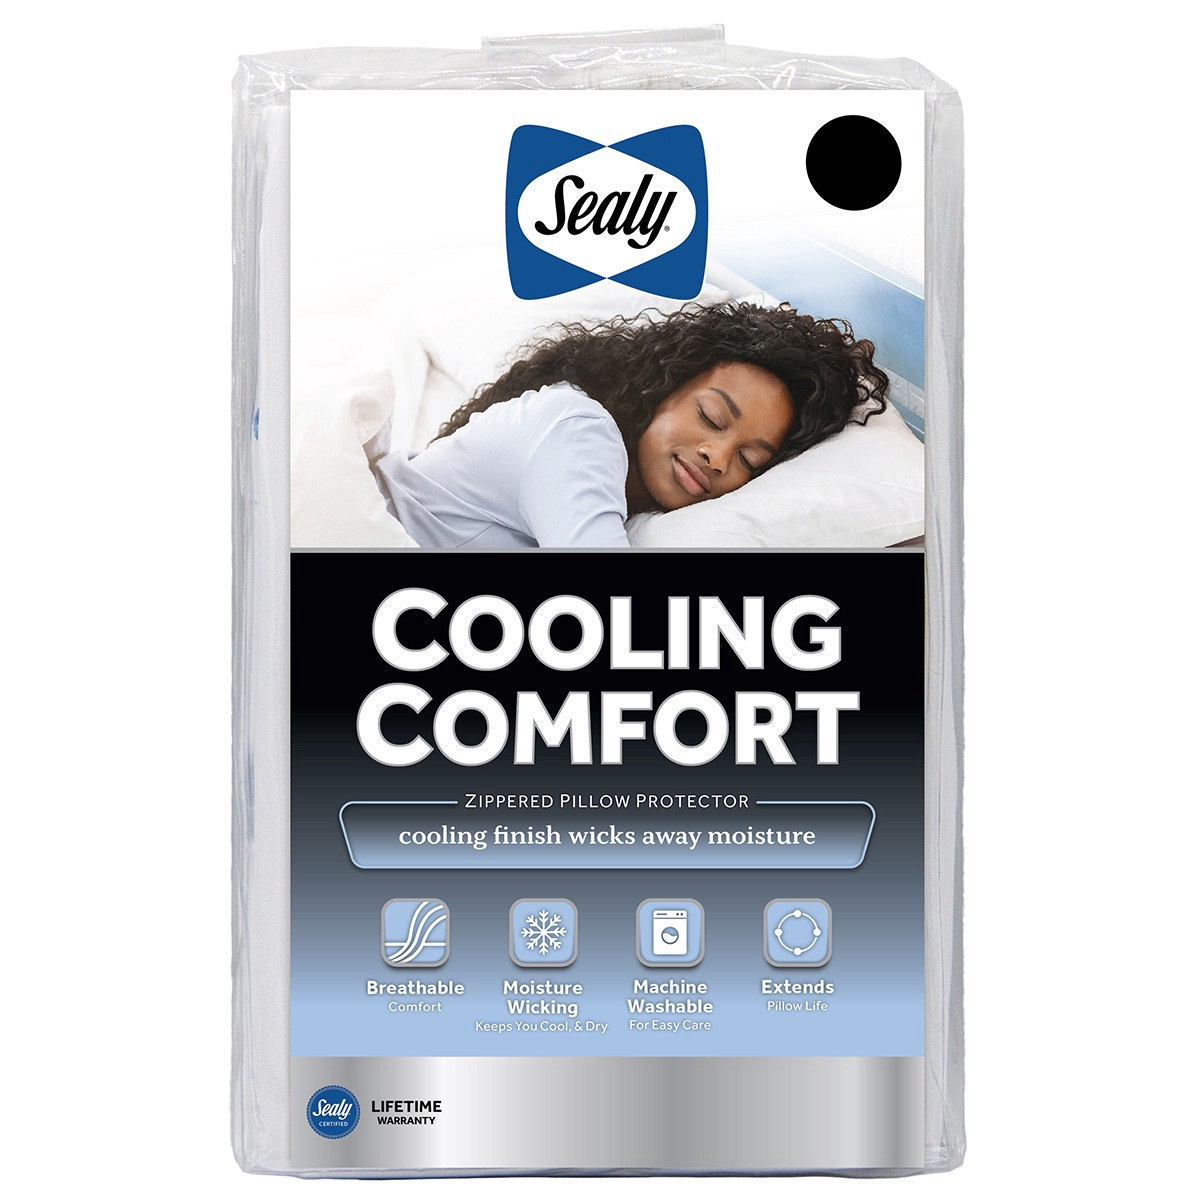 slide 1 of 17, Sealy Cooling Comfort Zippered Pillow Protector, King, 1 ct